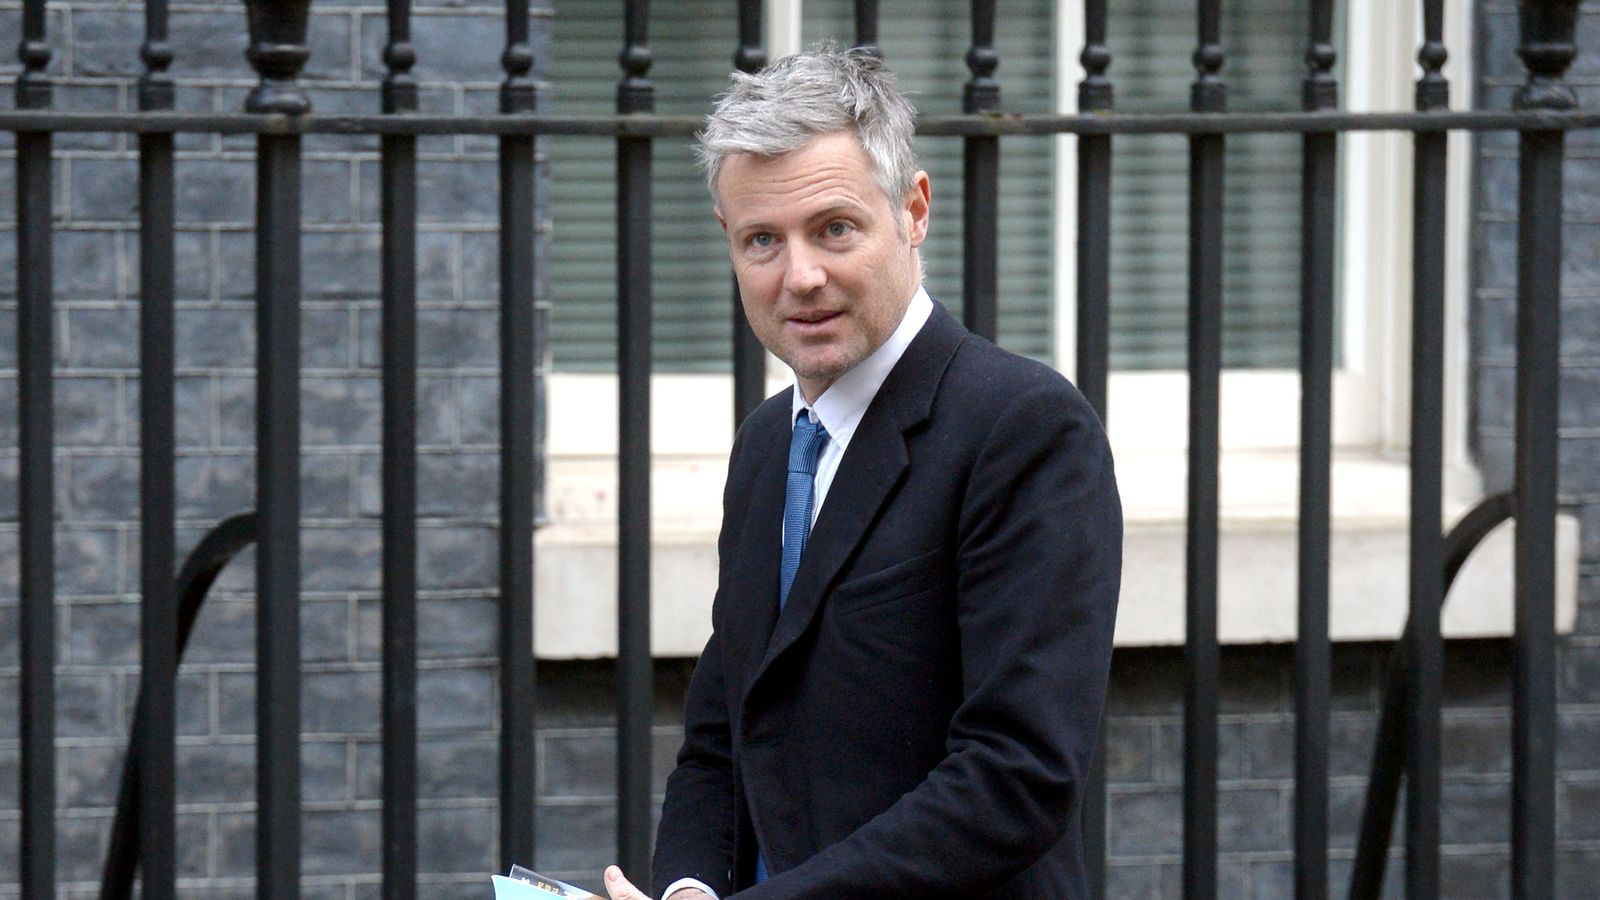 Conservative peer and Boris Johnson ally Zac Goldsmith 'very tempted' to support Labour at next general election